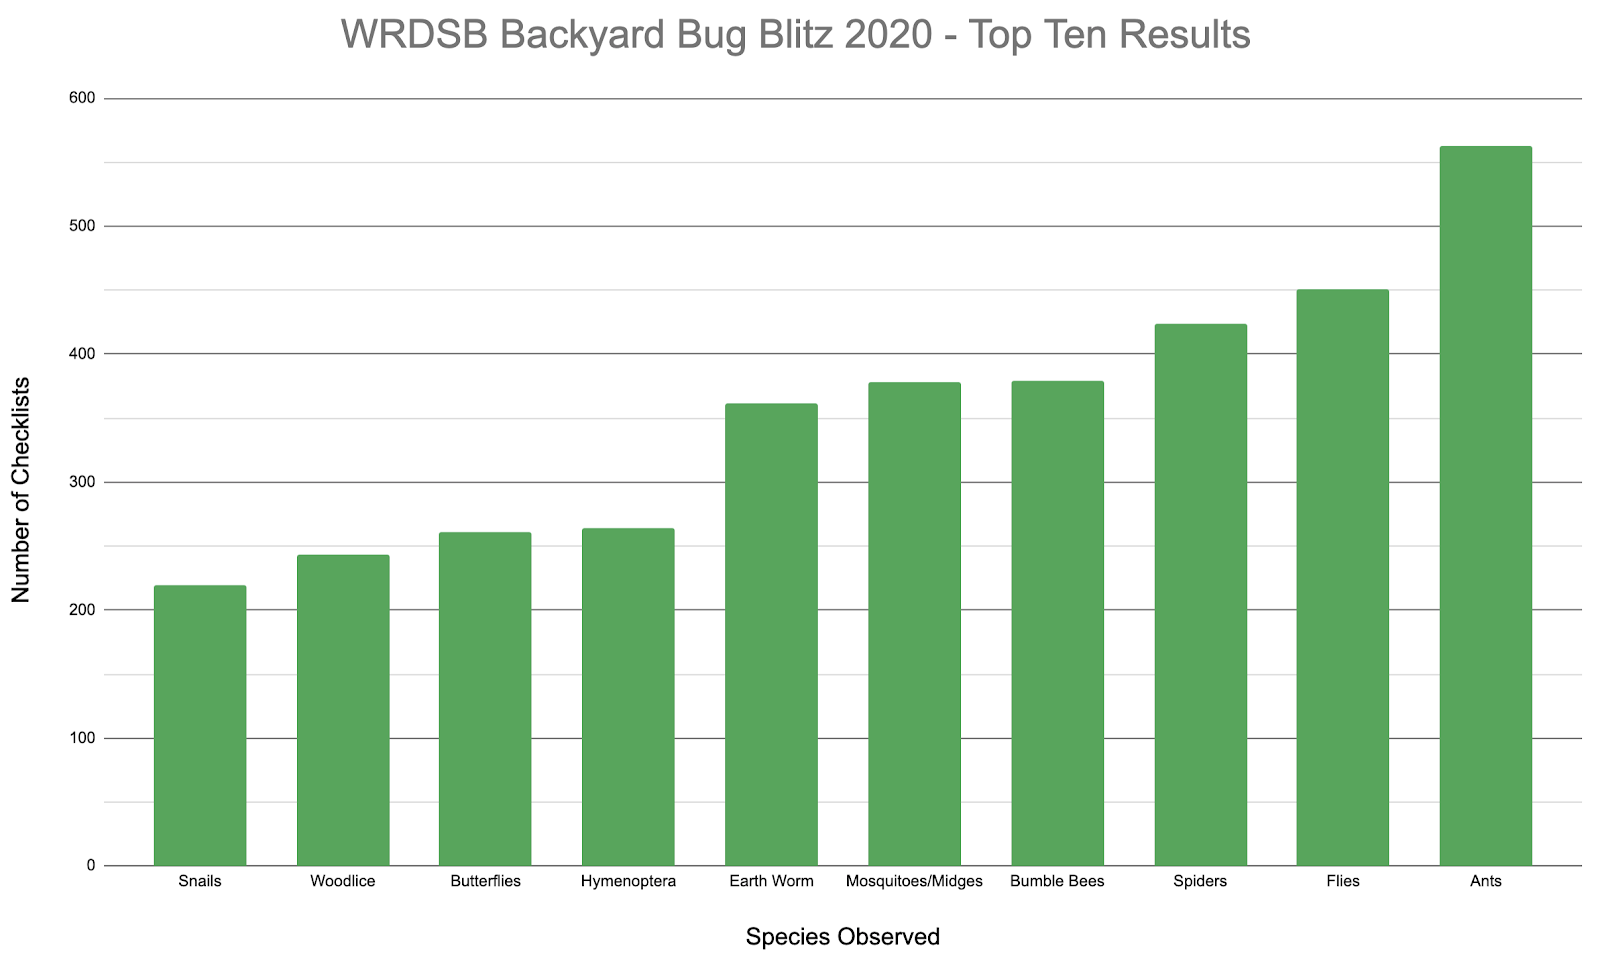 A bar graph displaying the number of checklist observations for the 10 most observed species in the WRDSB Backyard Bug Blitz. The bars display 220 observed snails, 243 observed woodlice, 261 observed butterflies, 264 observed hymenoptera, 362 observed earth worms, 378 observed mosquitoes and midges, 379 observed bumble bees, 424 observed spiders, 451 observed flies, and 563 observed ants.